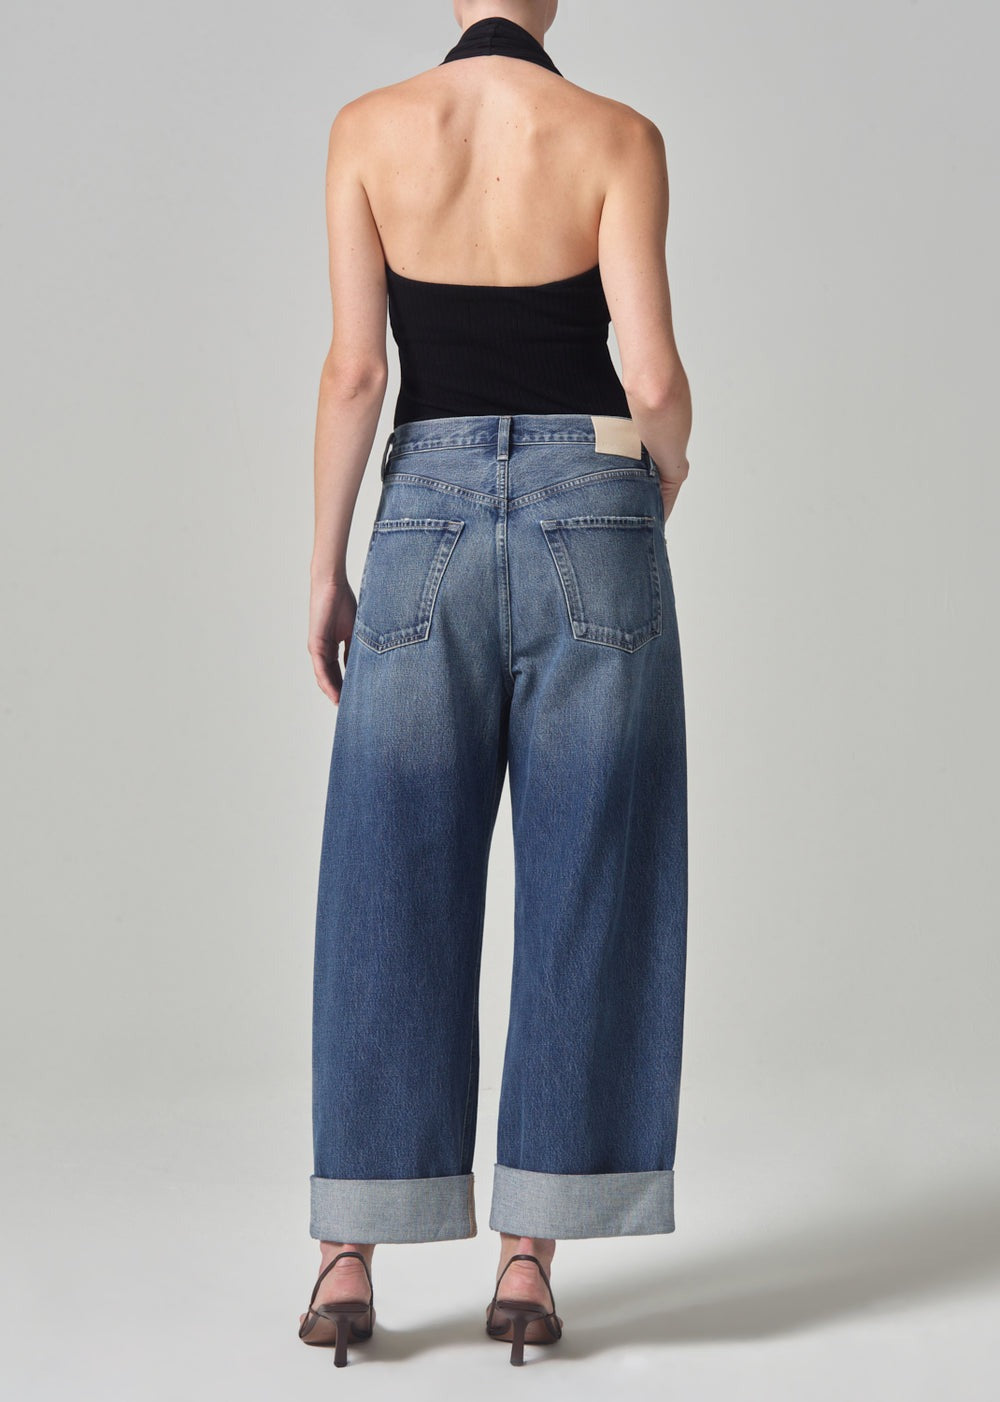 Citizens of Humanity Ayla Baggy Cuffed Crop Jeans in Brielle